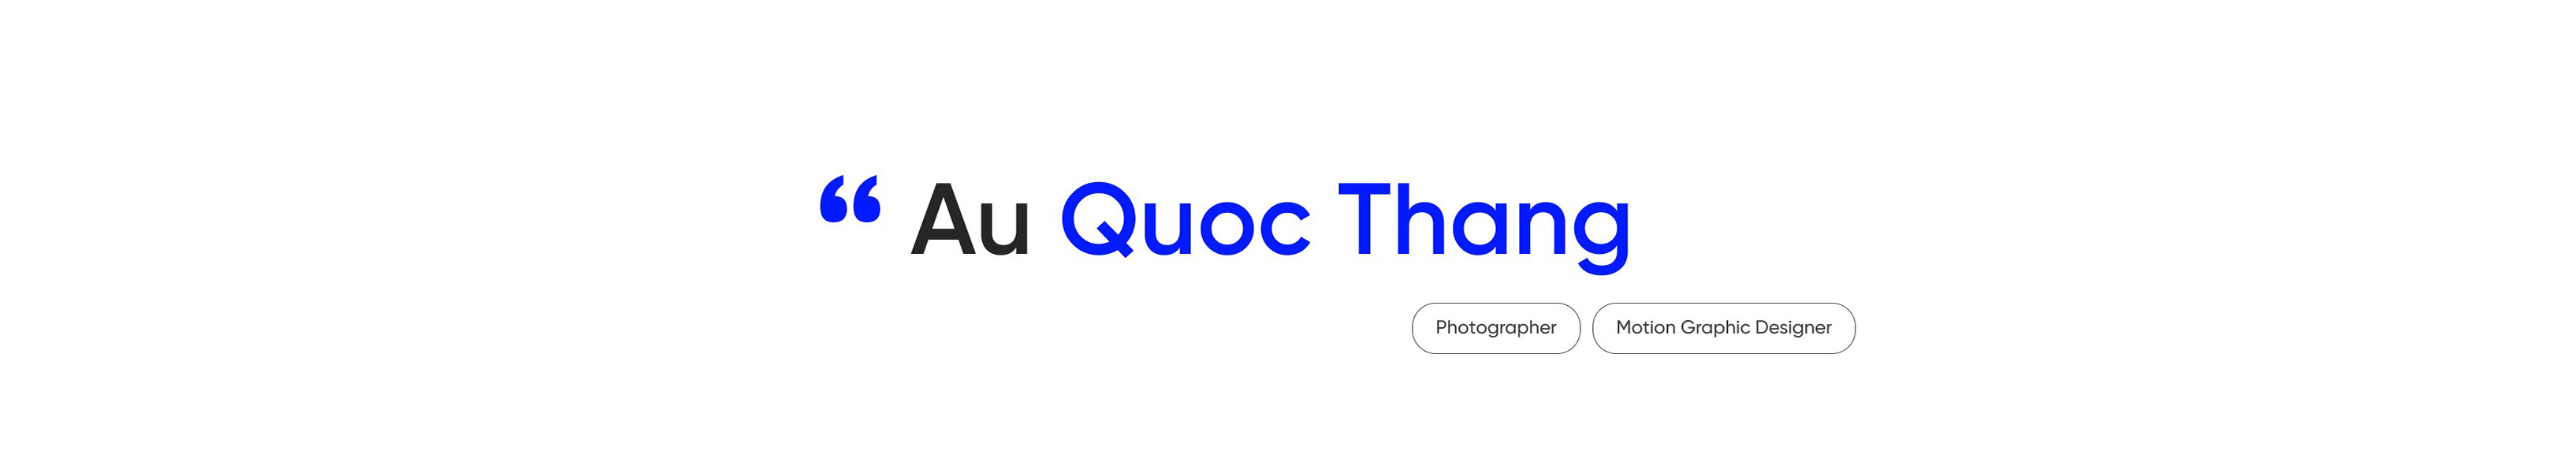 Quoc Thang's profile banner